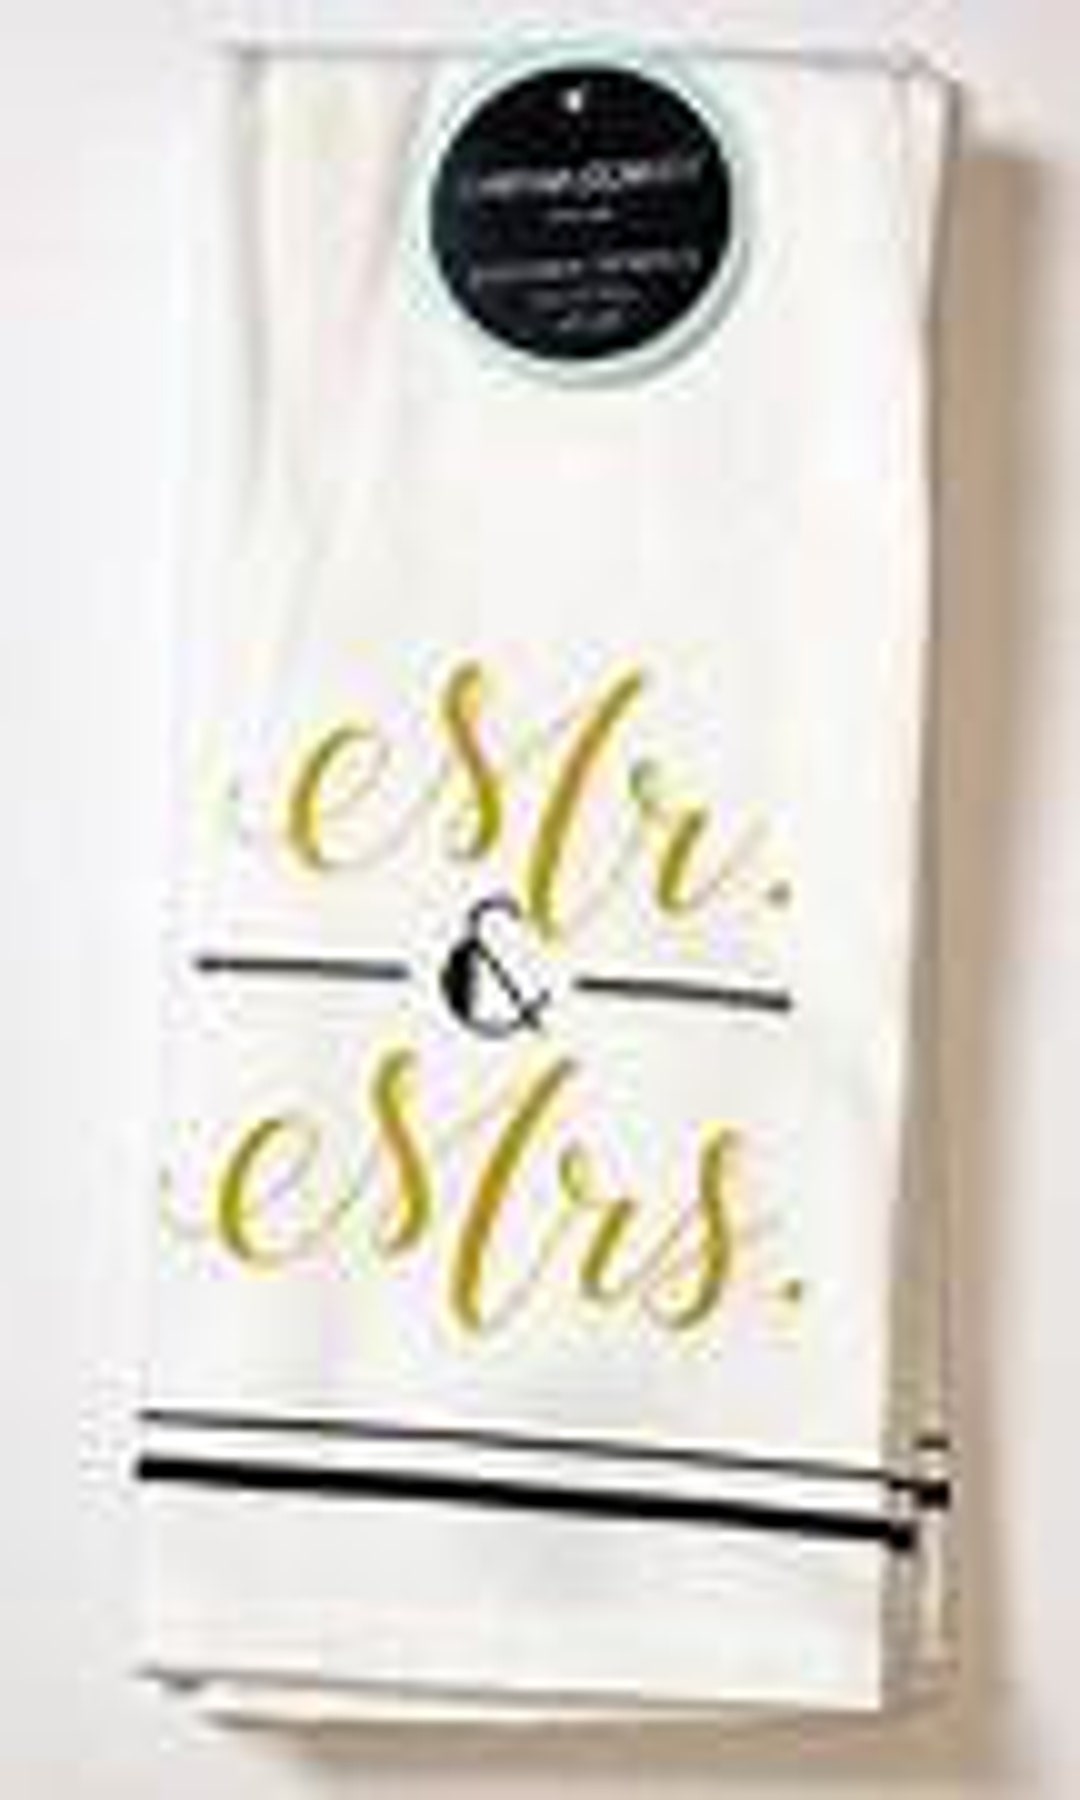 MR. & MRS. Cynthia Rowley New York kitchen towels. Set of two. NEW Wedding  Gift in 2023